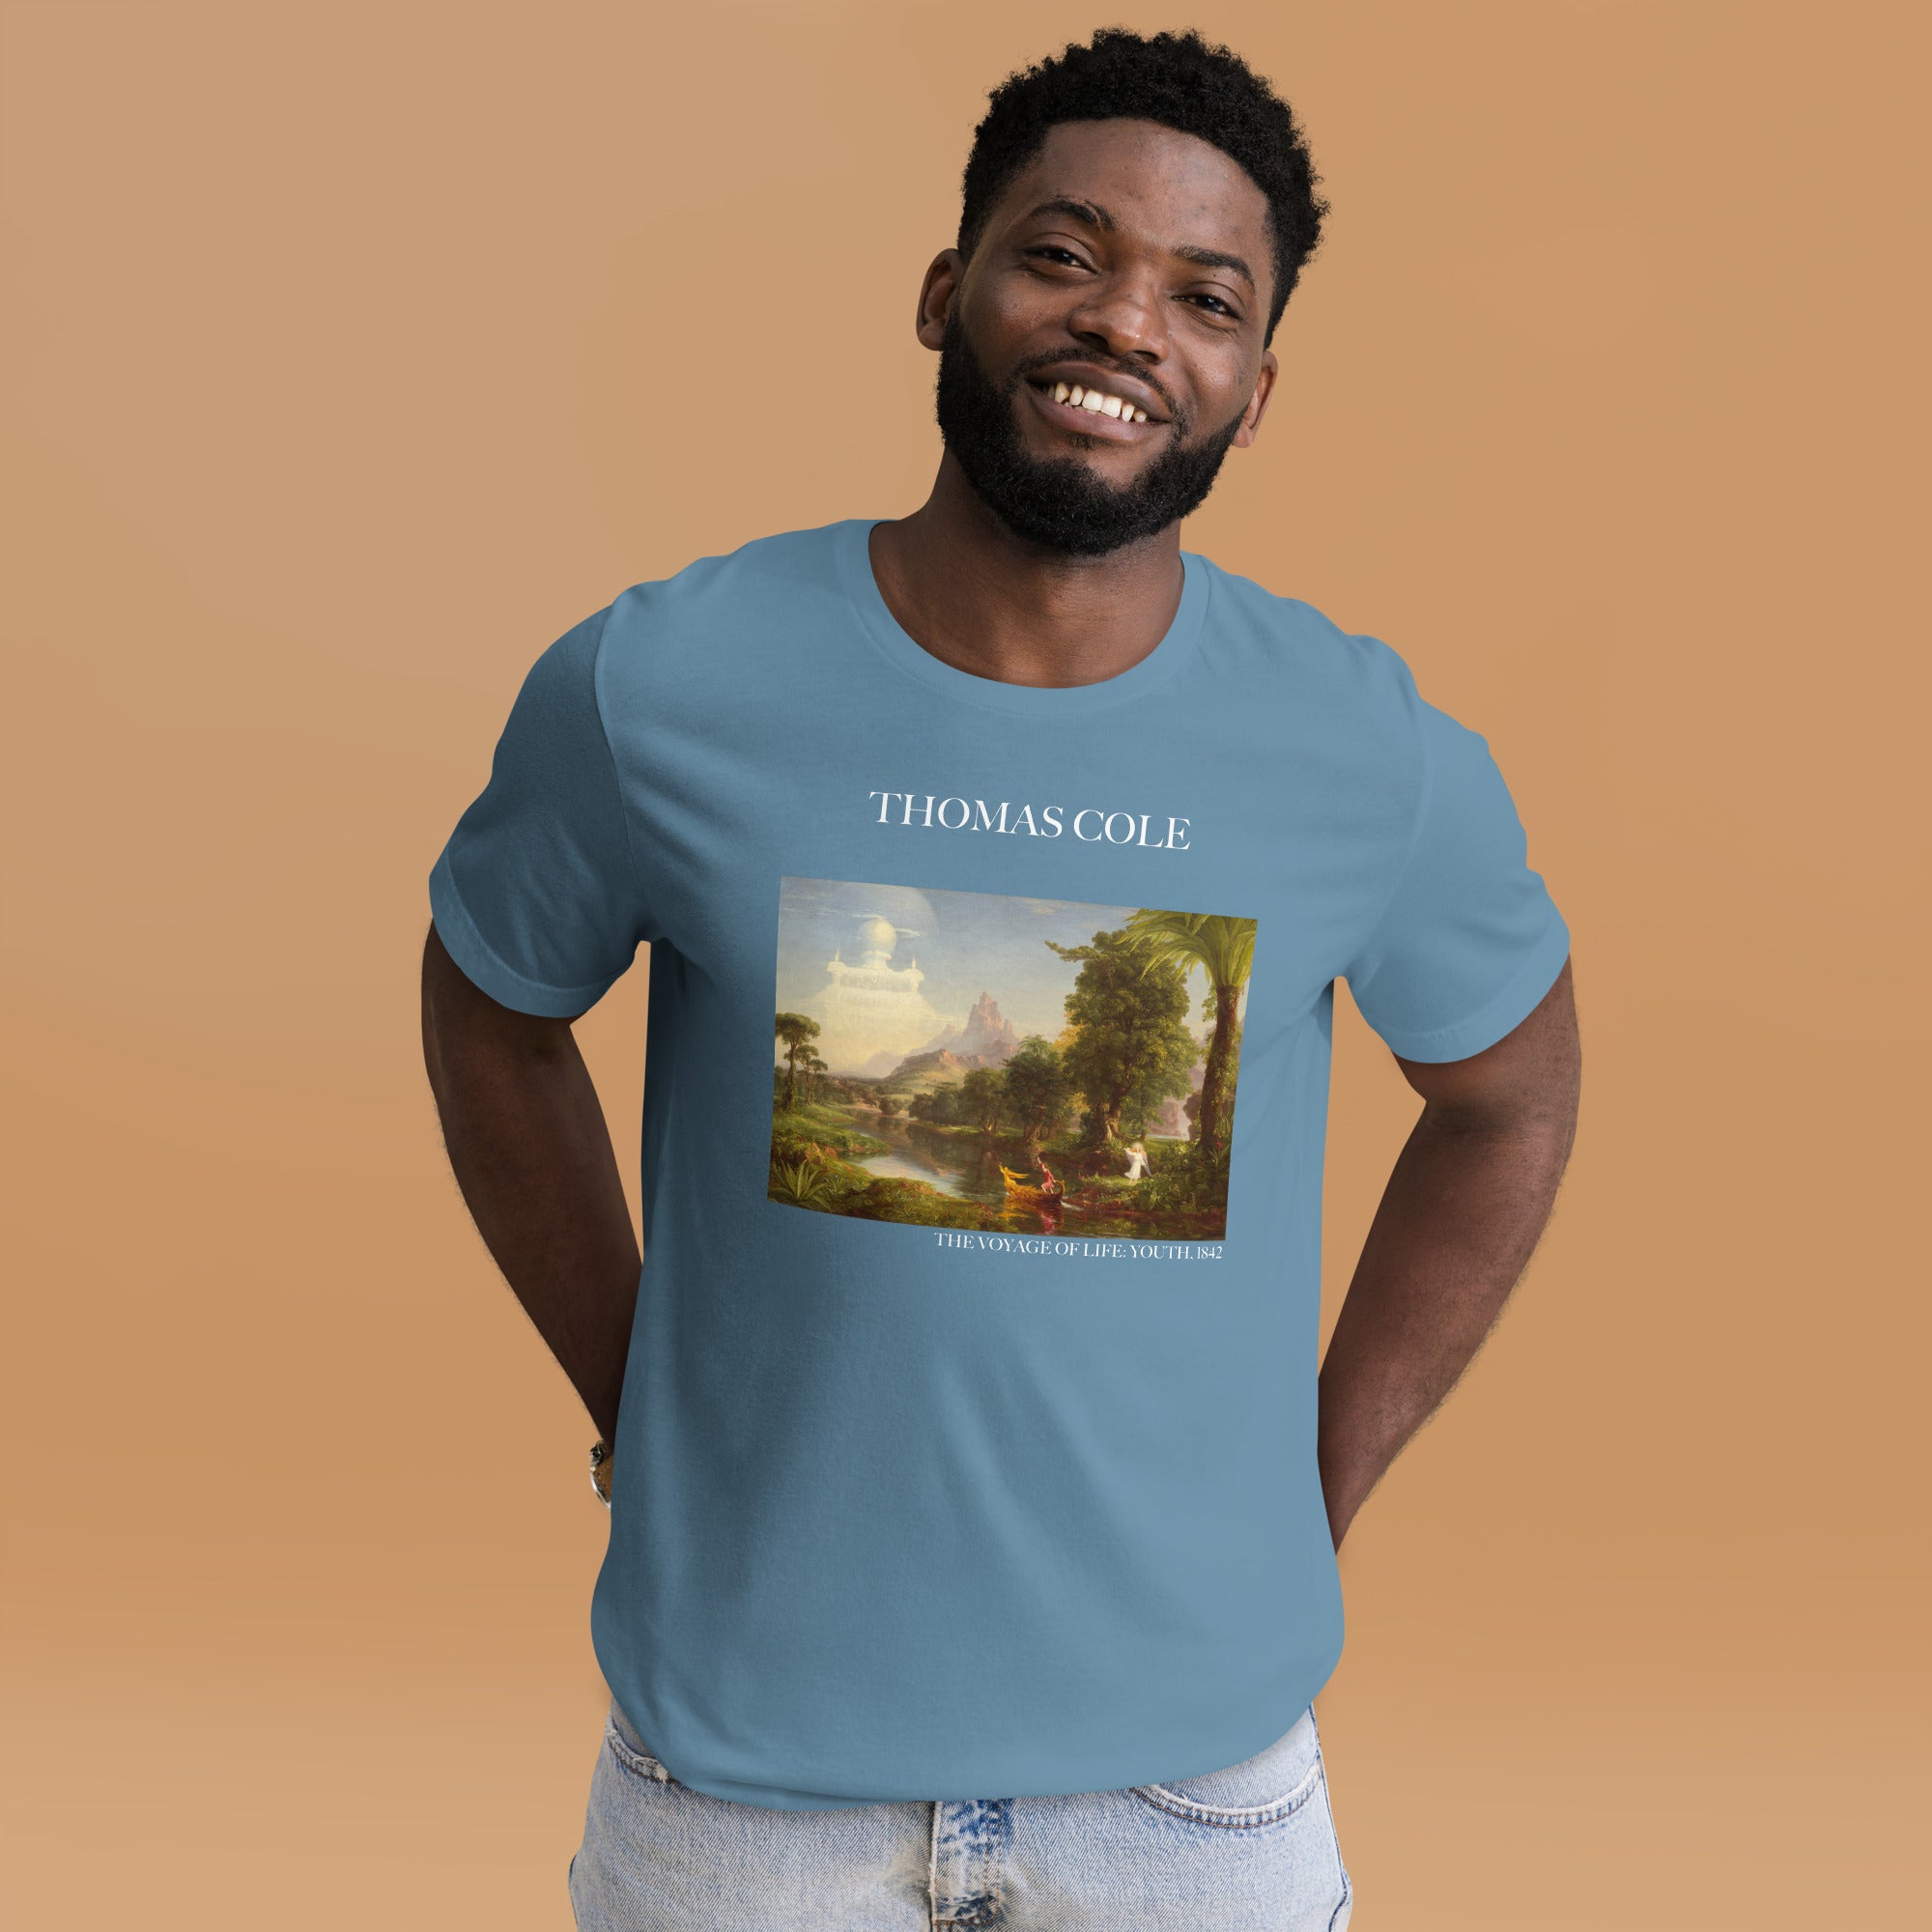 Thomas Cole 'The Voyage of Life: Youth' Famous Painting T-Shirt | Unisex Classic Art Tee